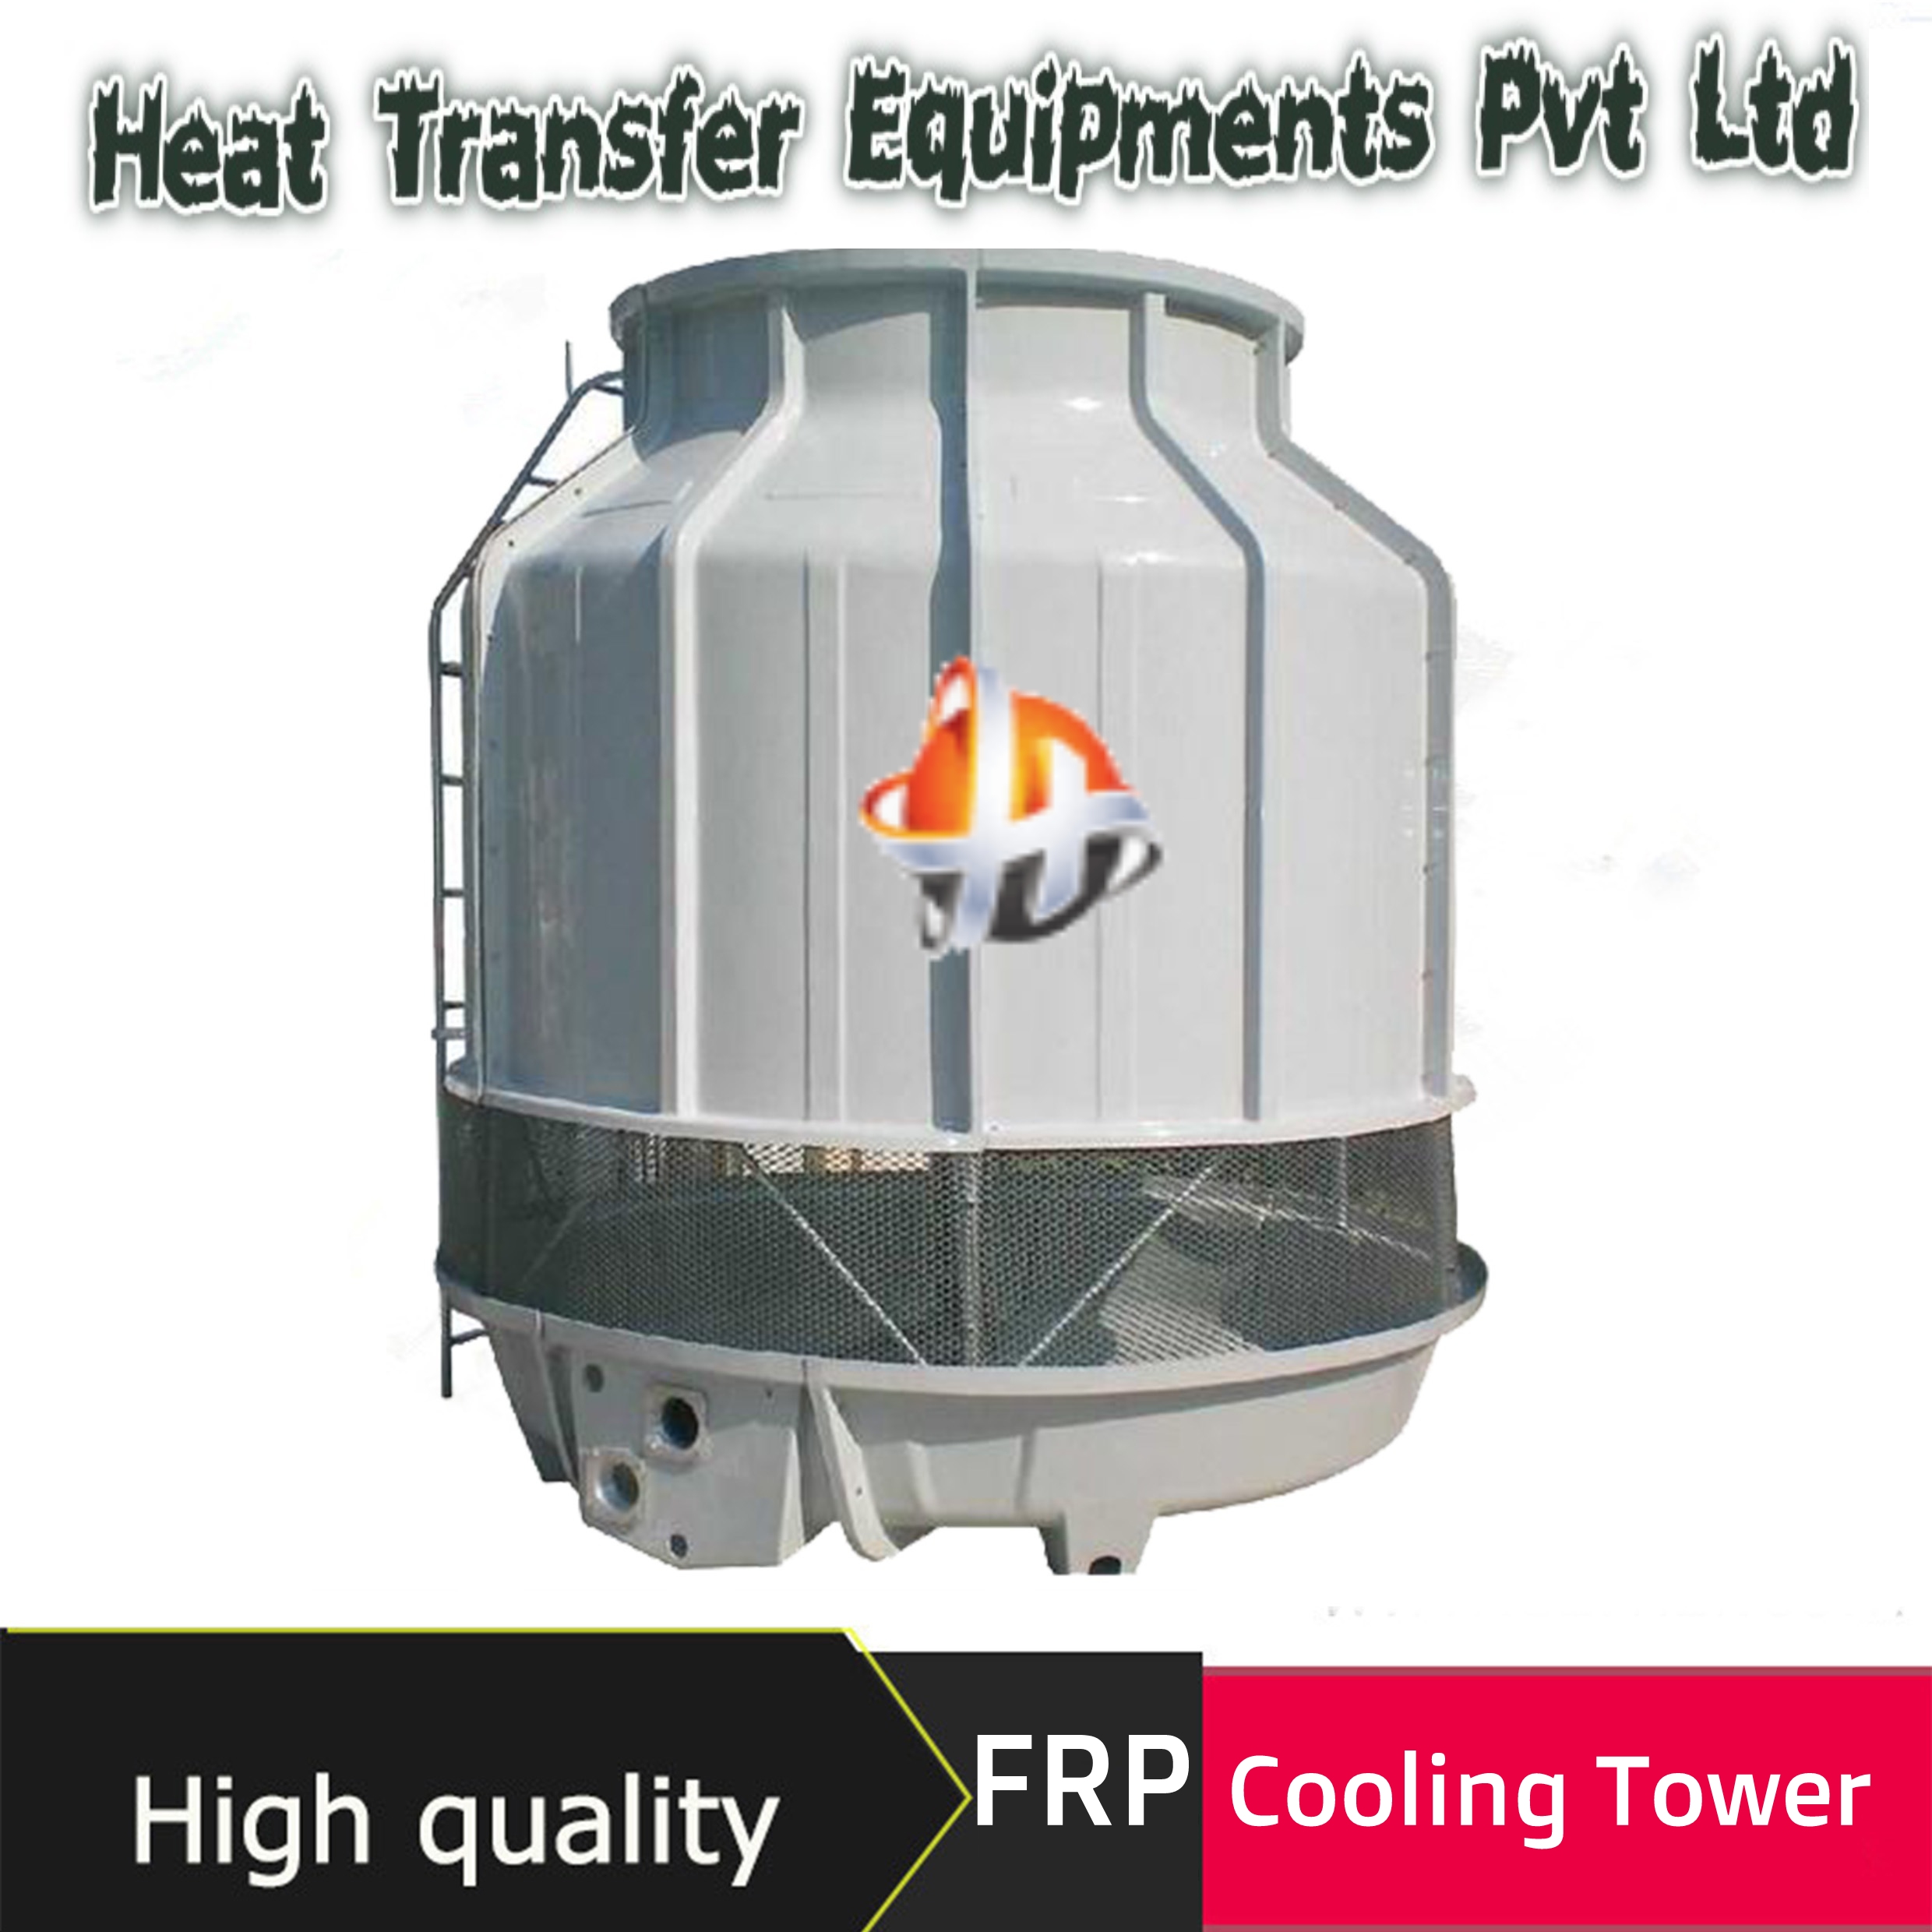 822141_FRP Cooling tower.jpg